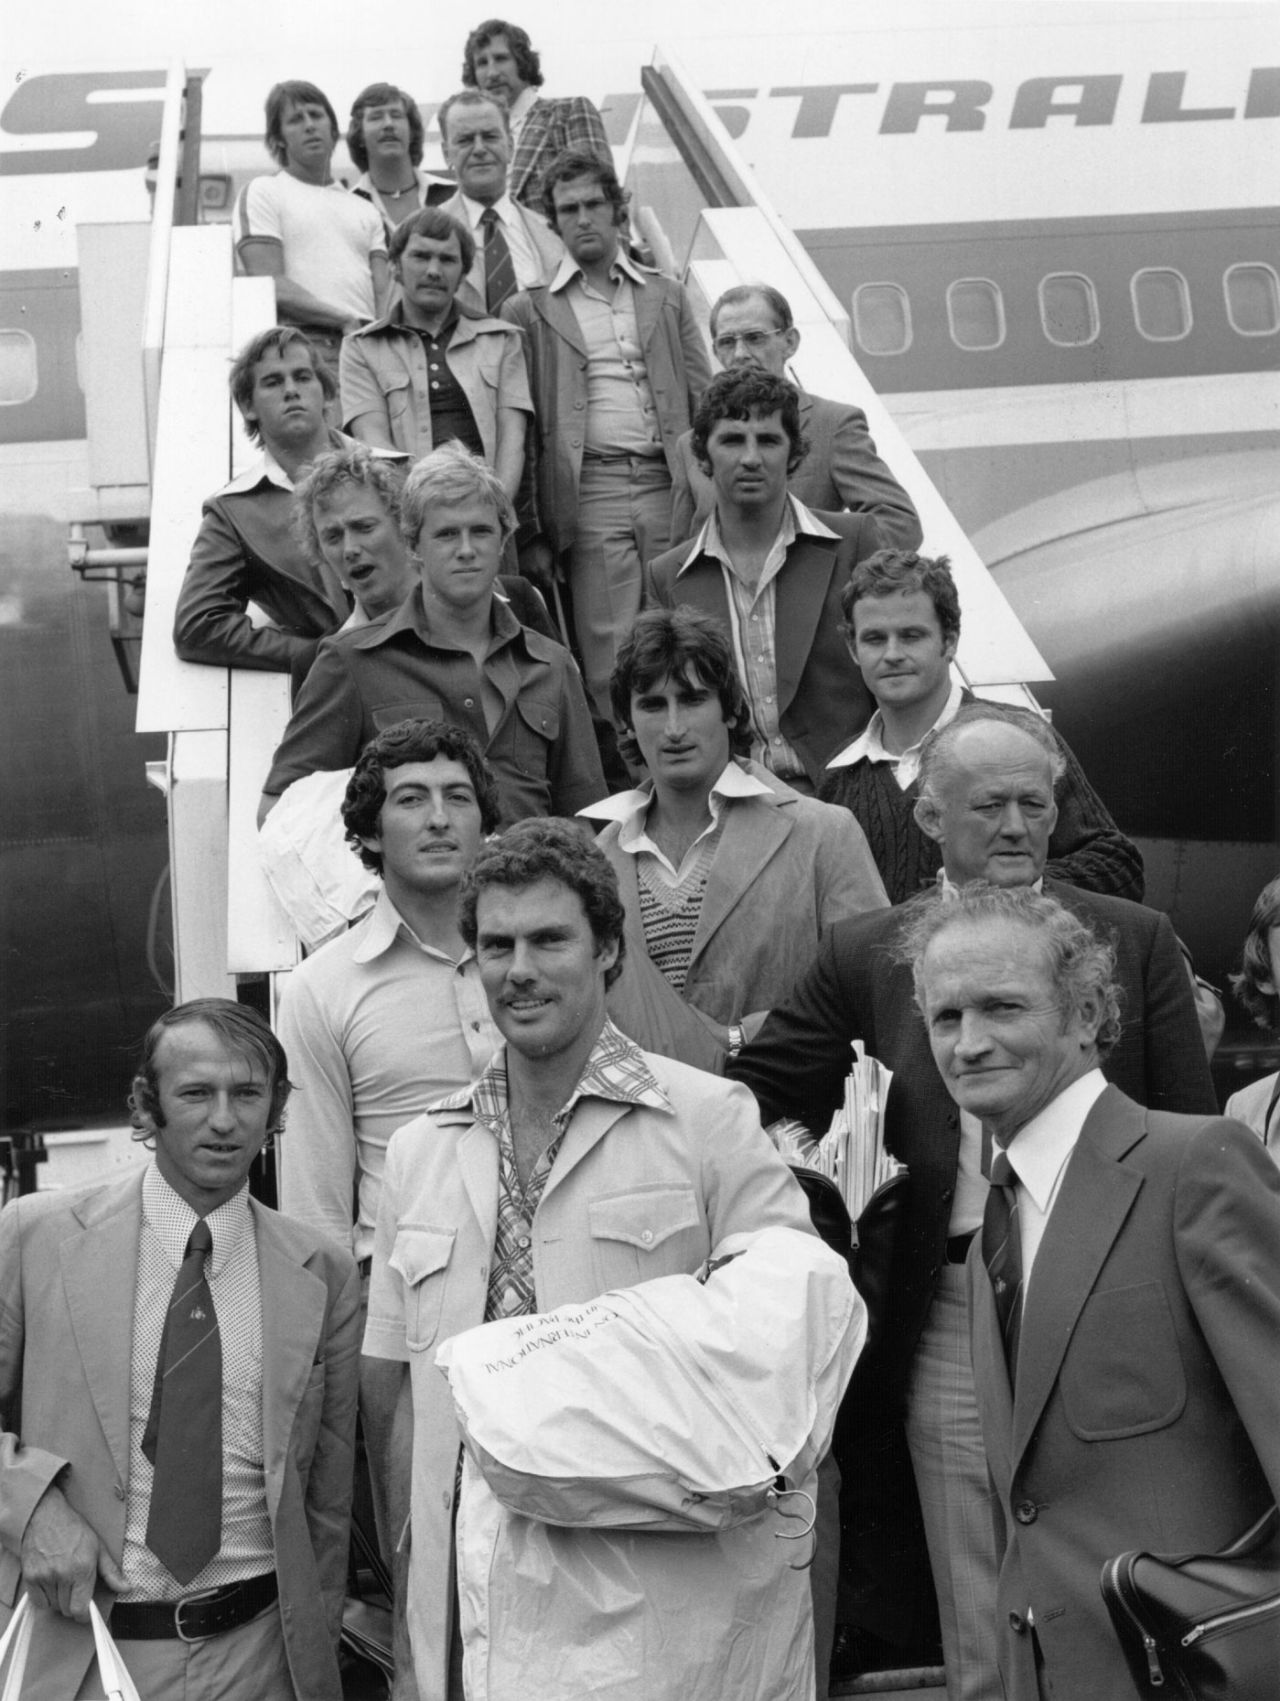 The Australian squad led by Greg Chappell arrives in London, April 22, 1977